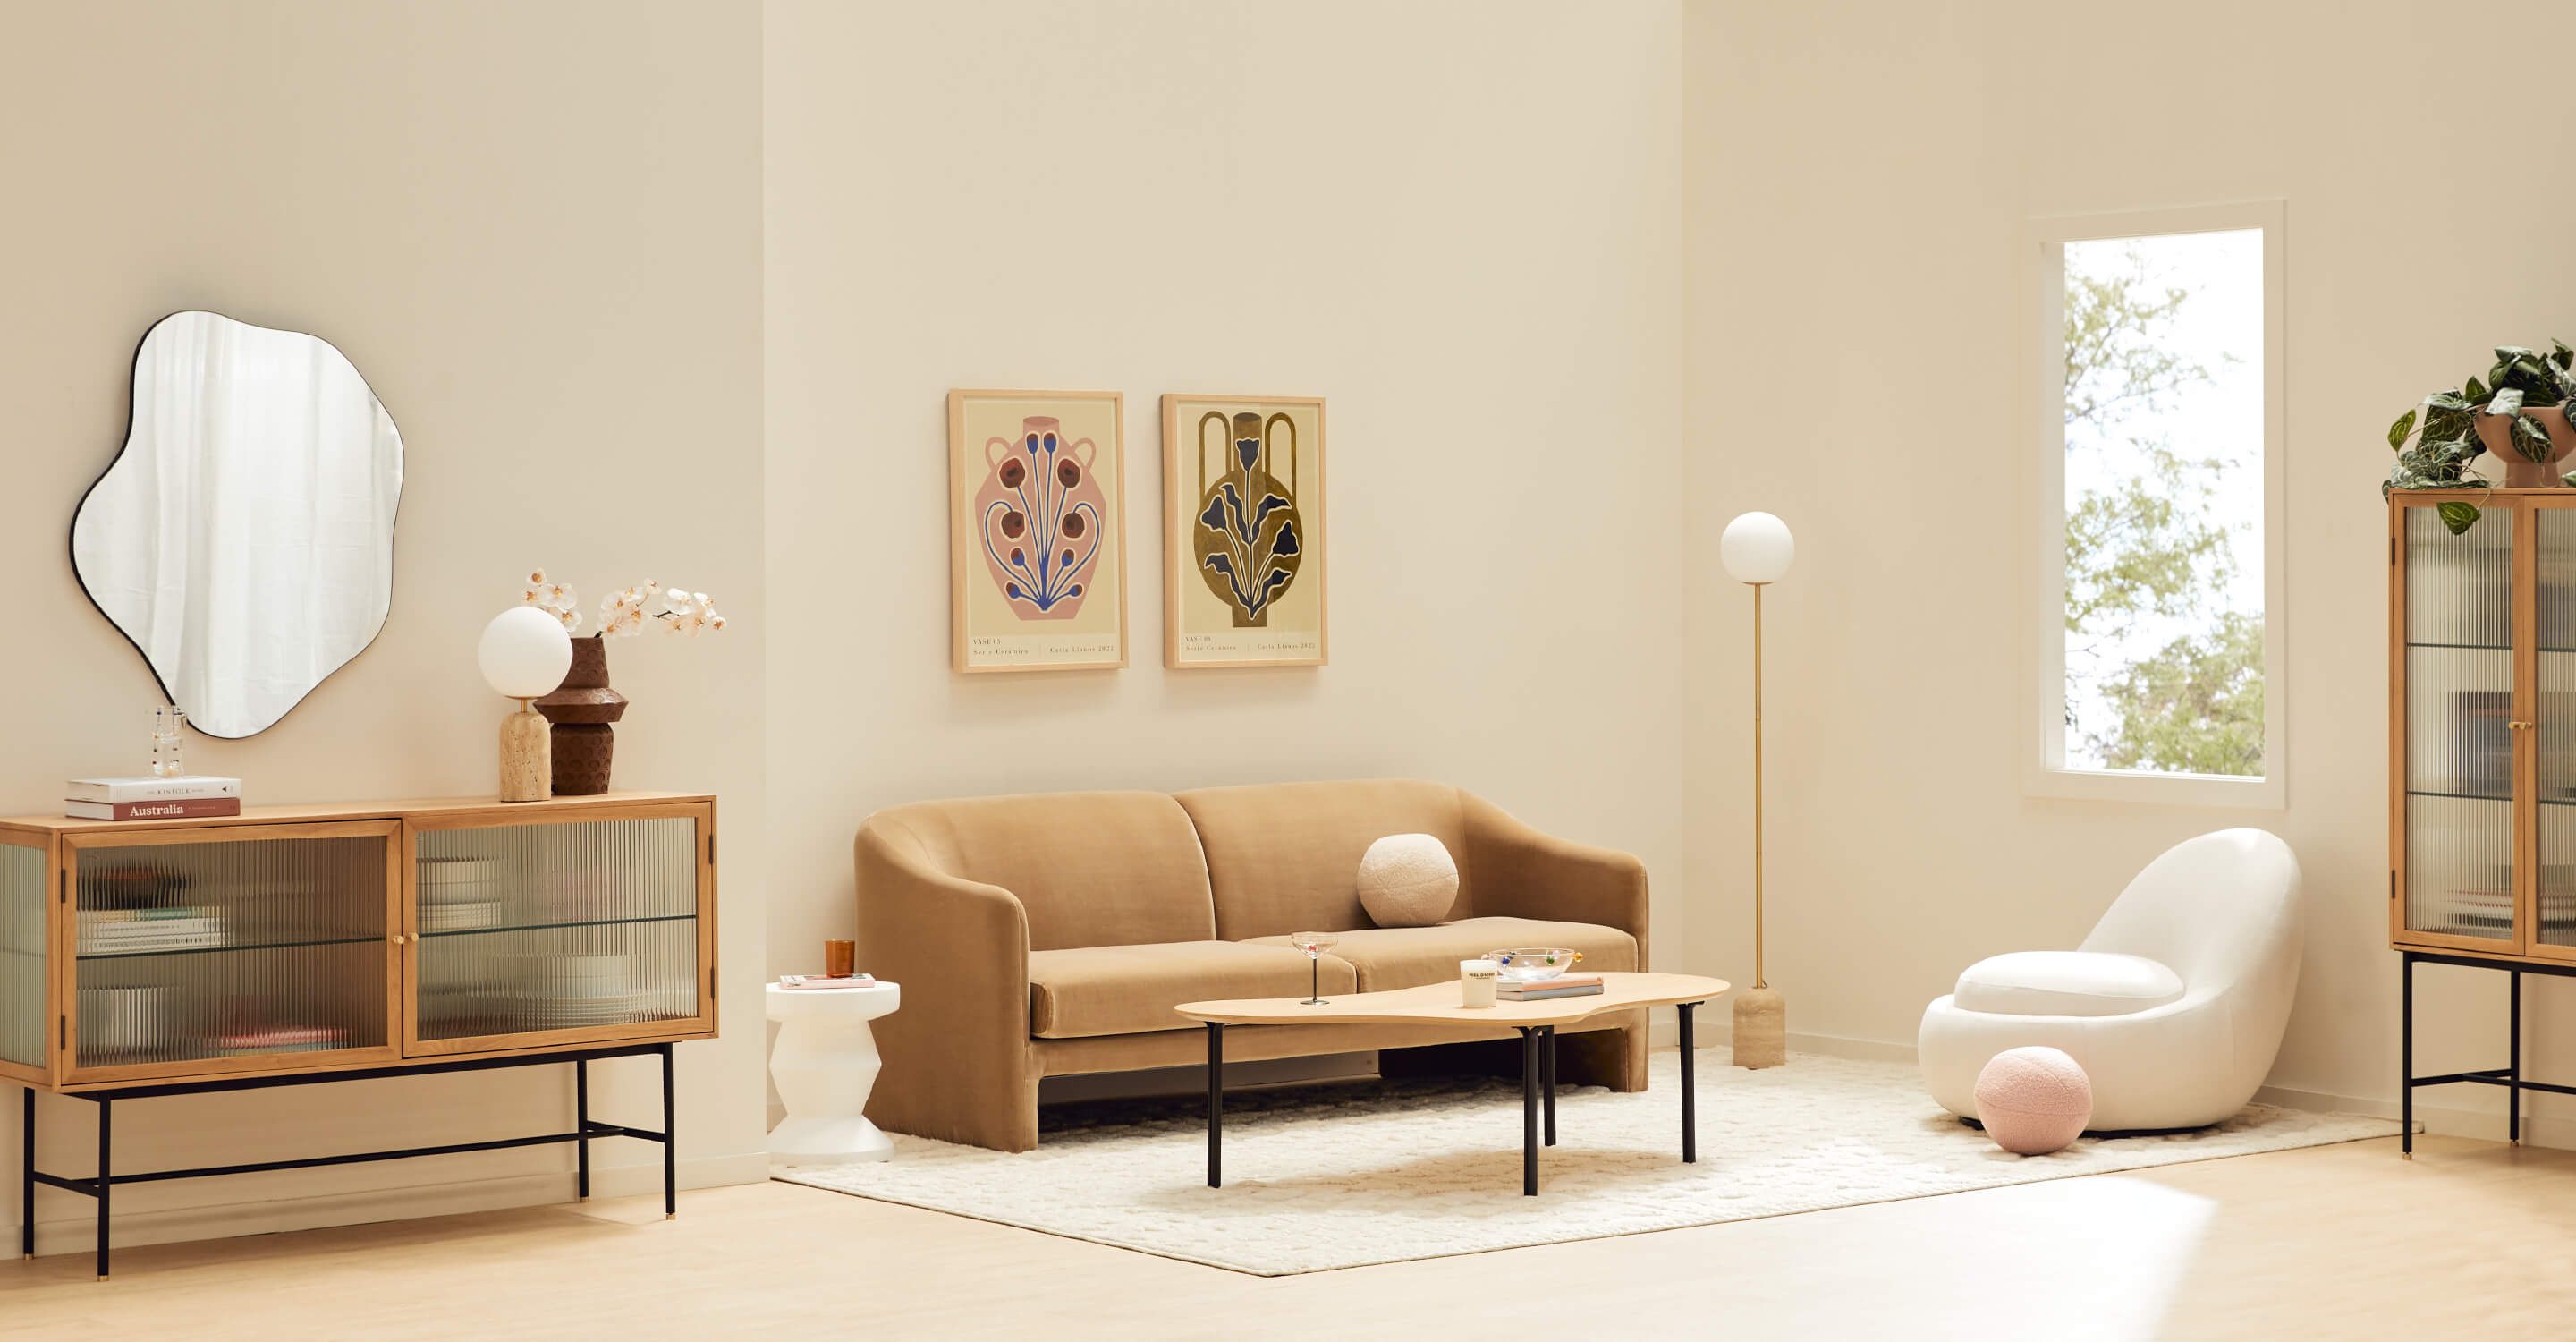 Introducing our Capsule Spring/ Summer 22 collection, the Spencer Living space is neutral and contemporary, full of stunning storage, armchairs and home decor. Shop the collection online or in-store now!